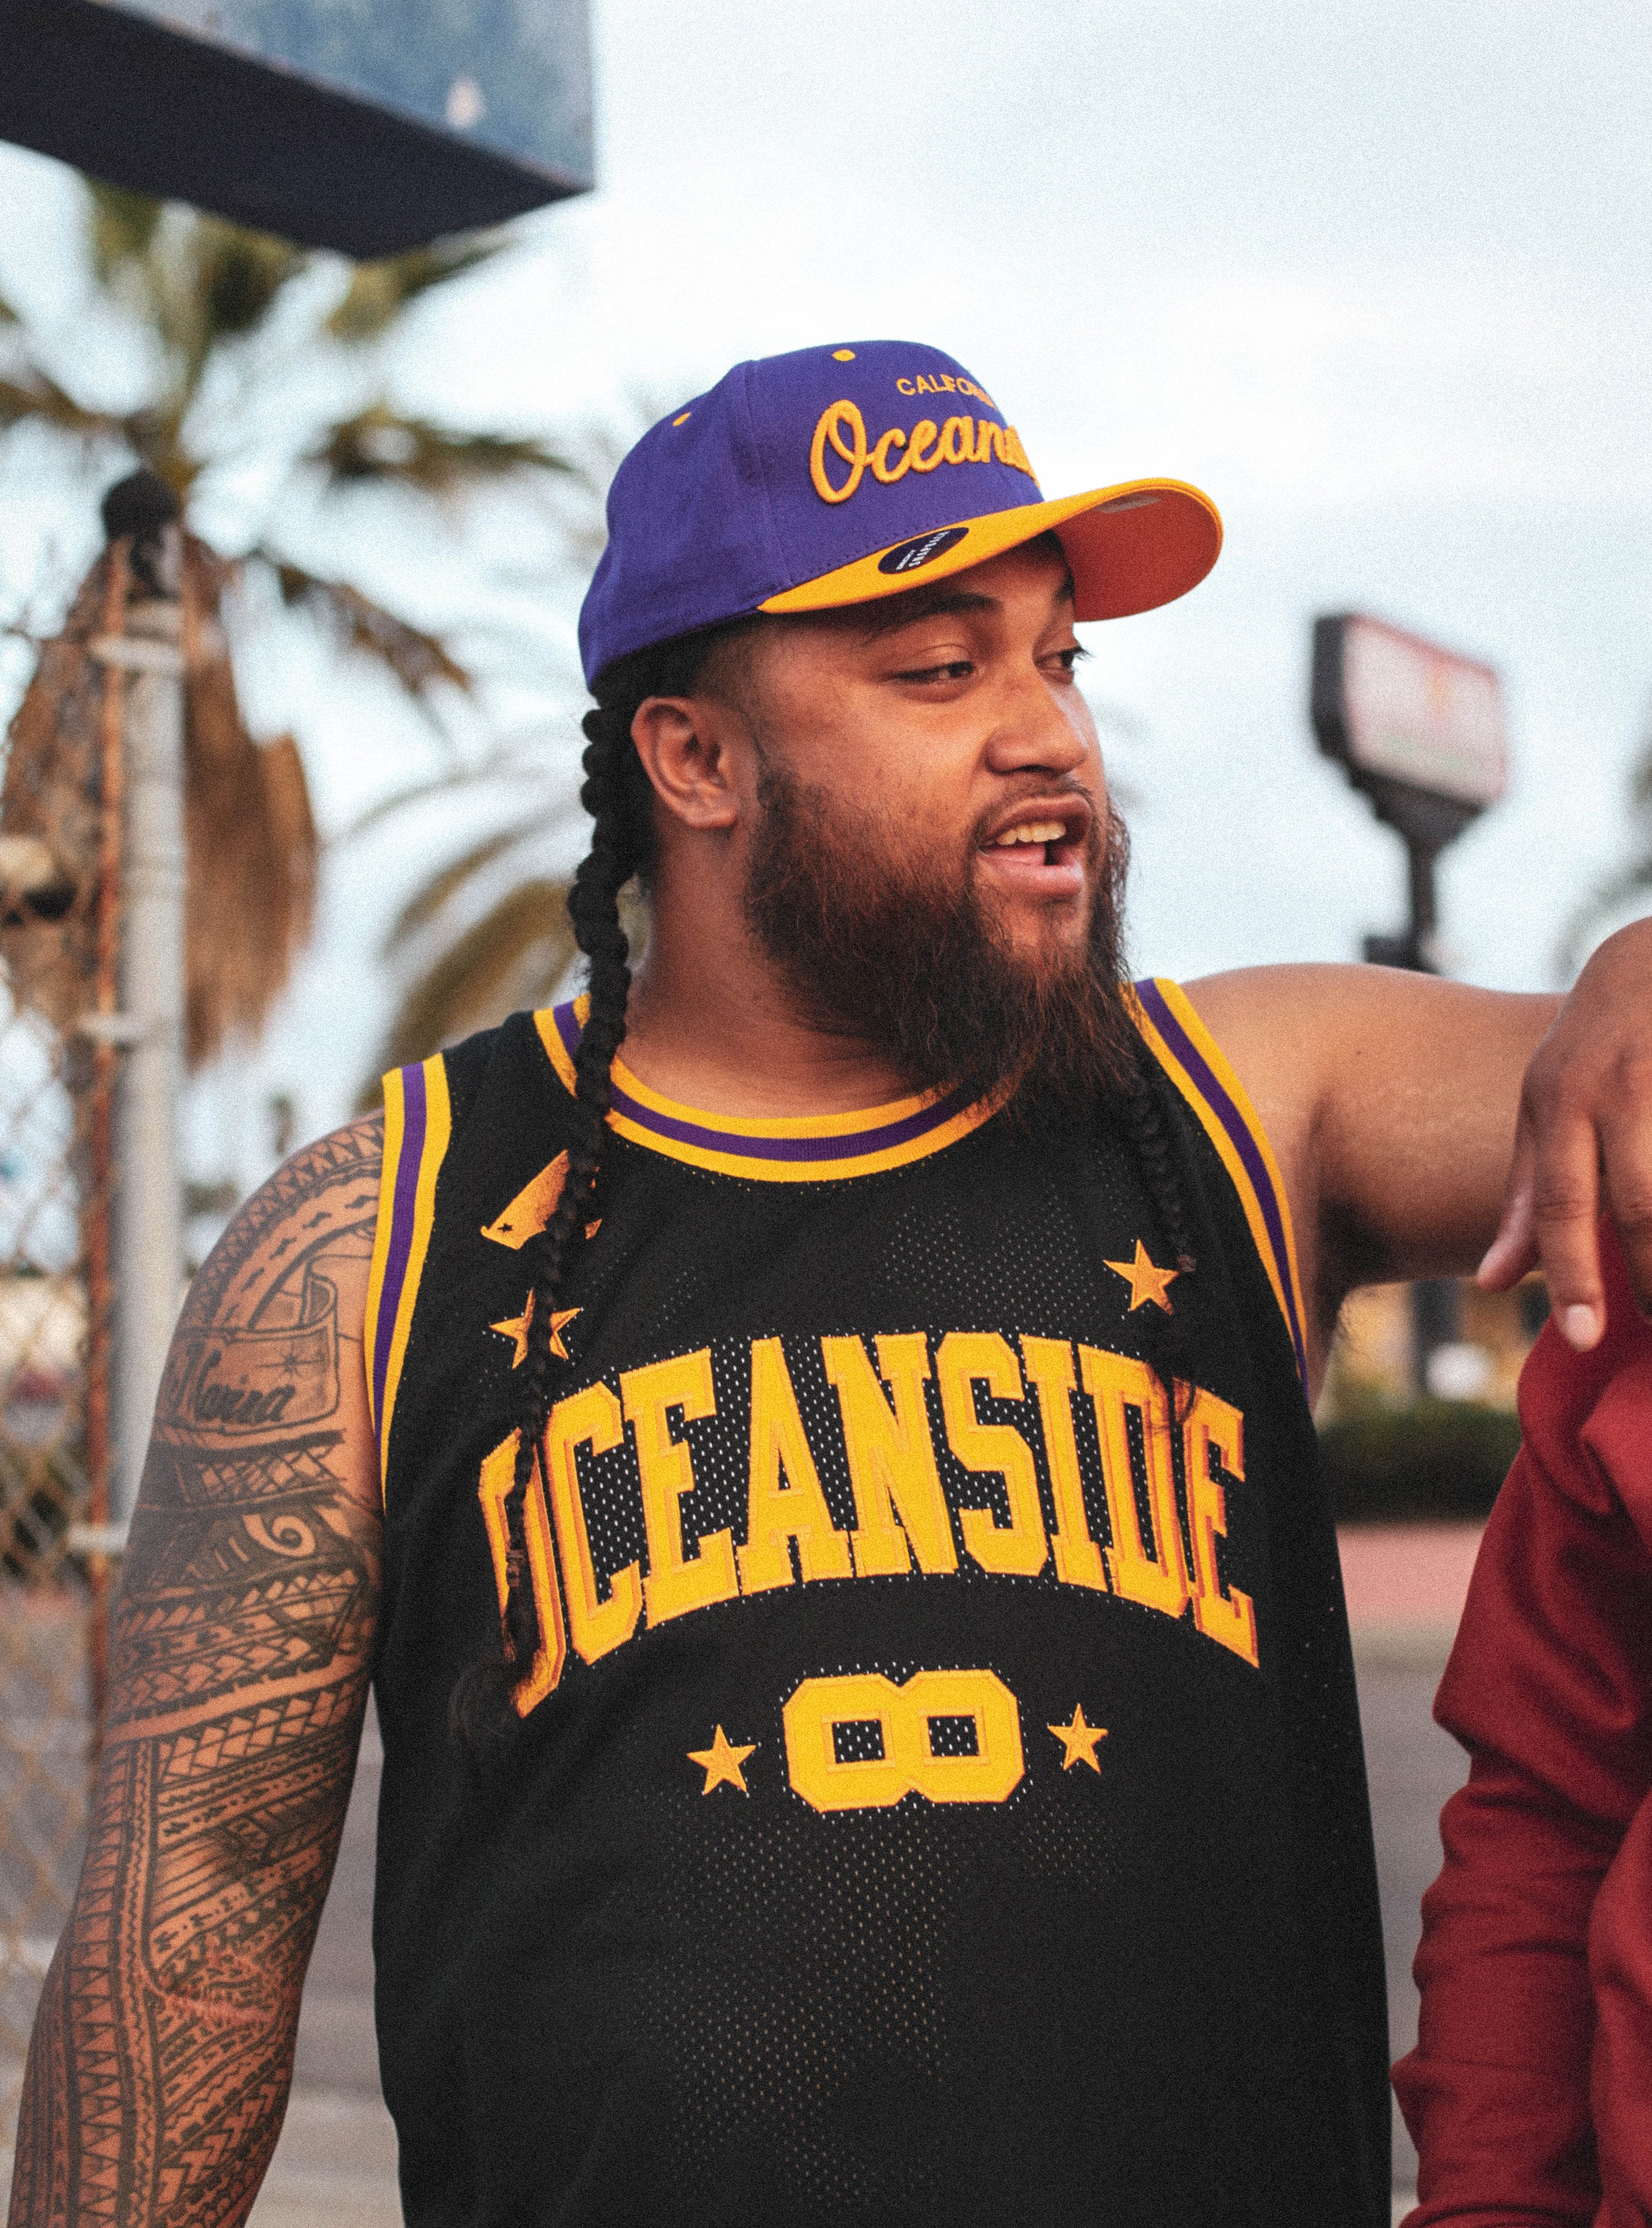 Classic Oceanside (Lakers Colorway) City Edition